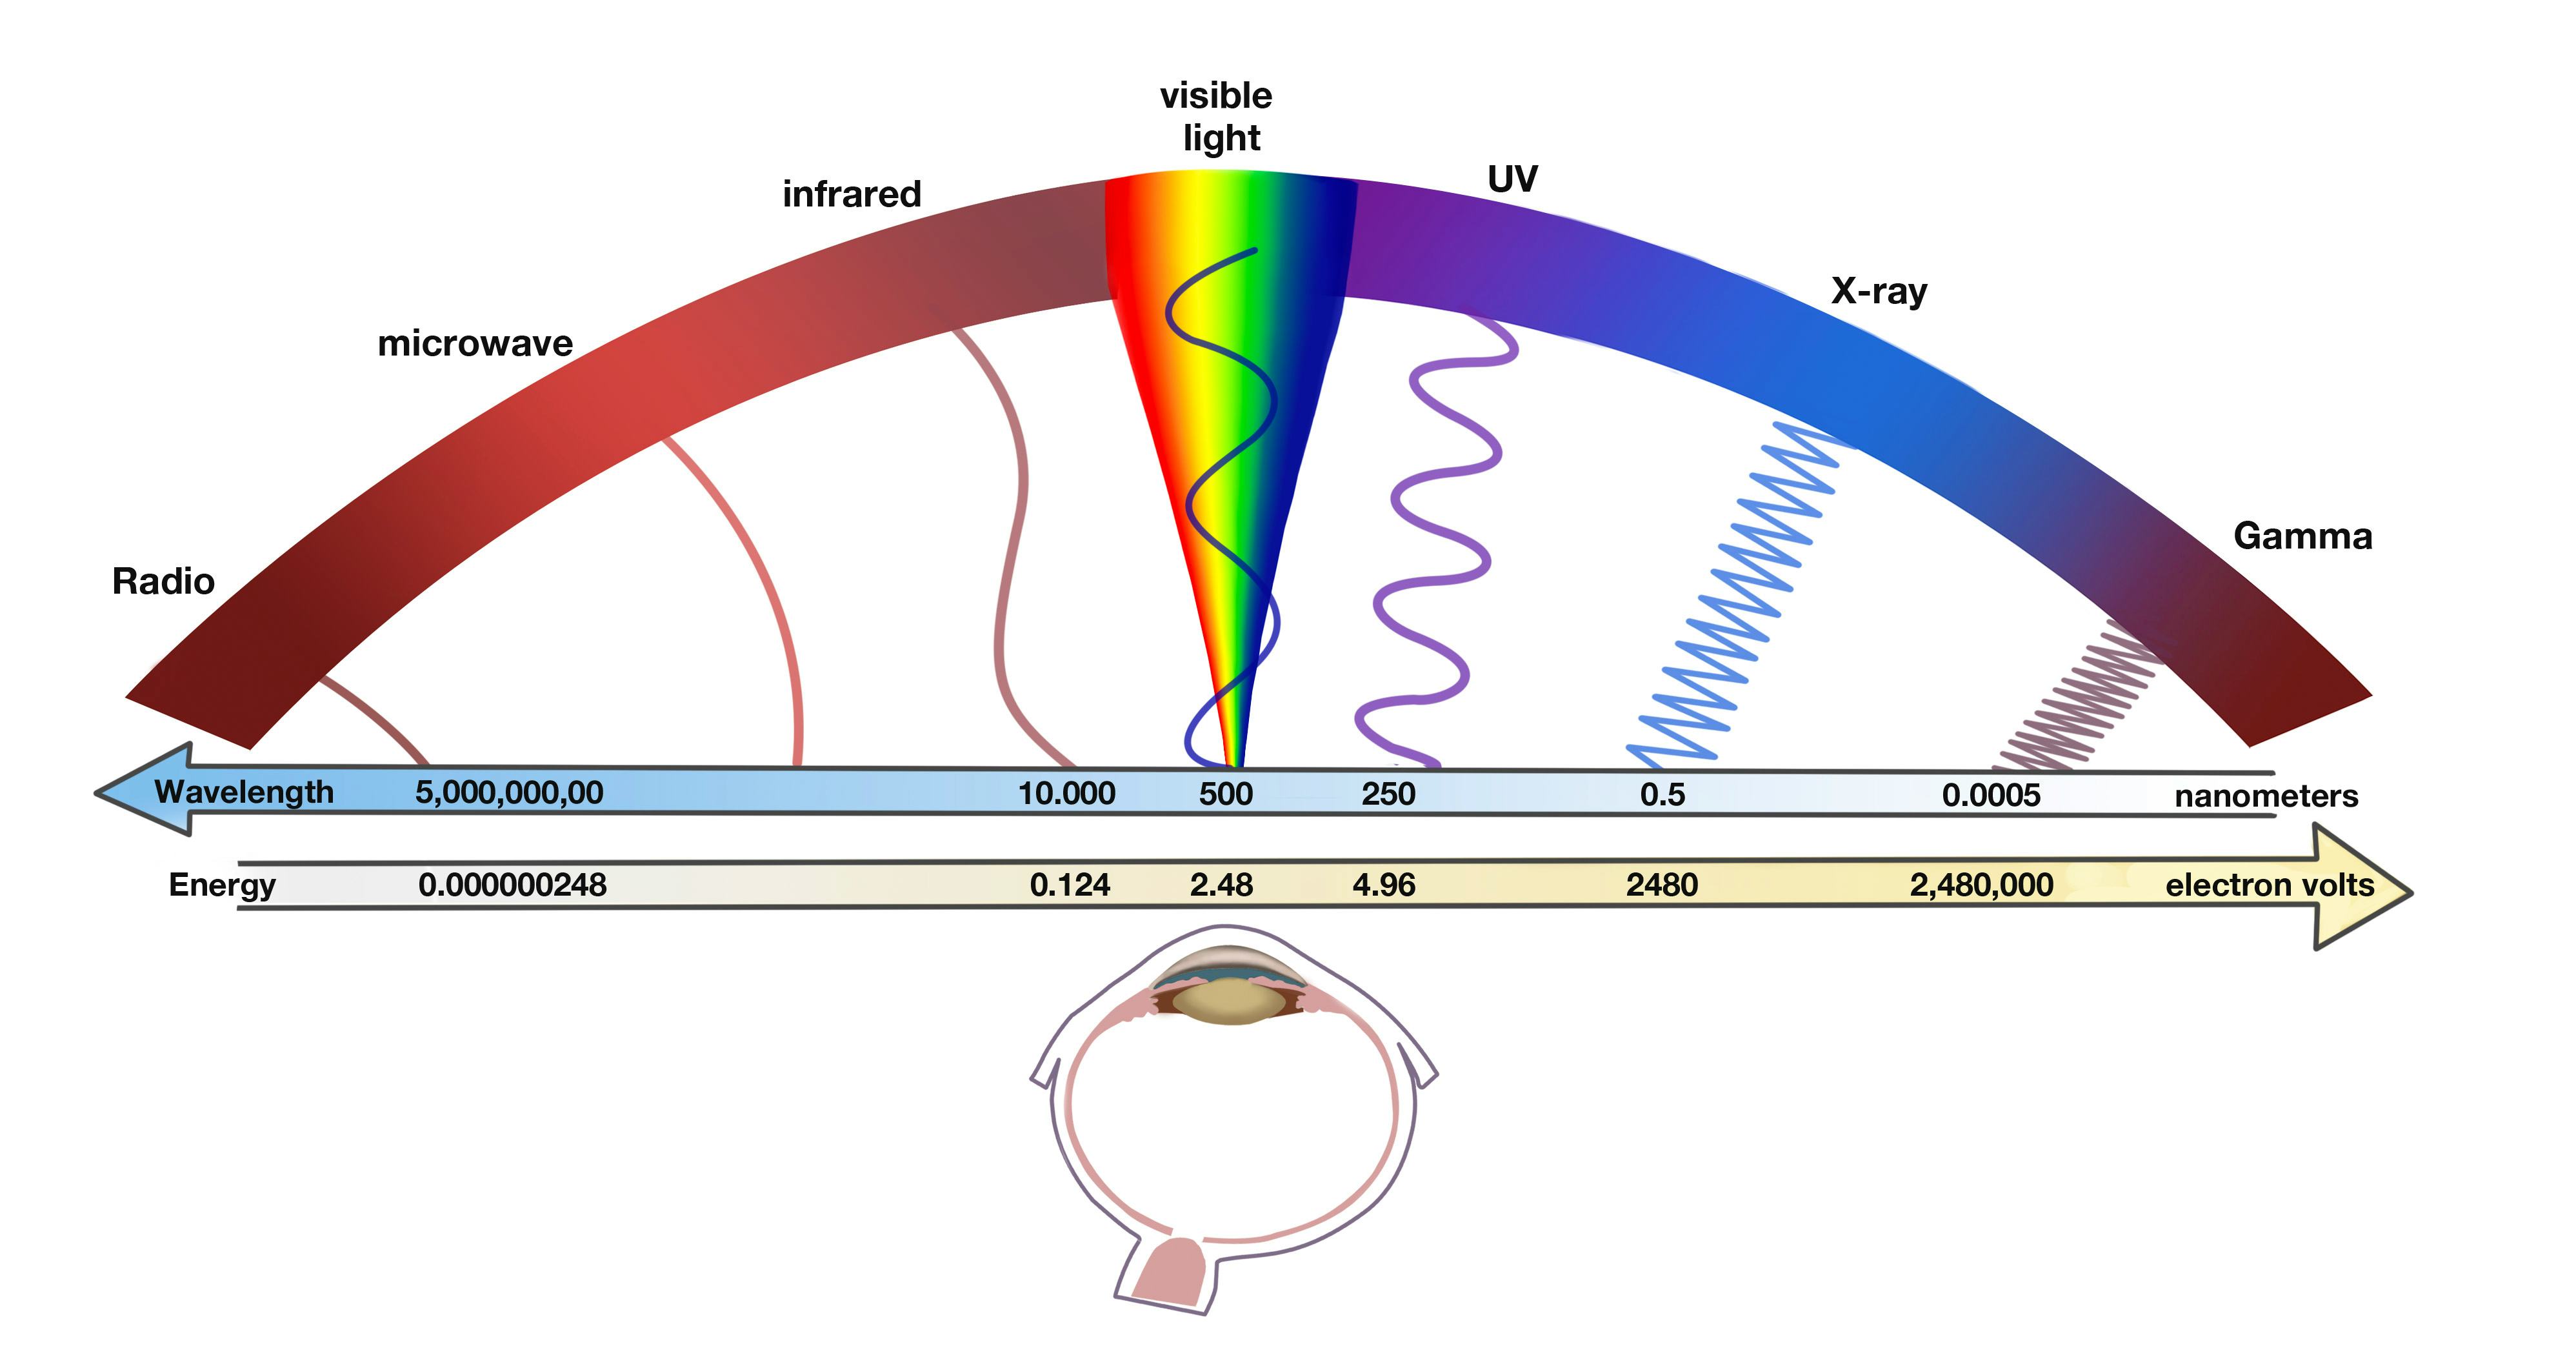 - is the visible light spectrum?